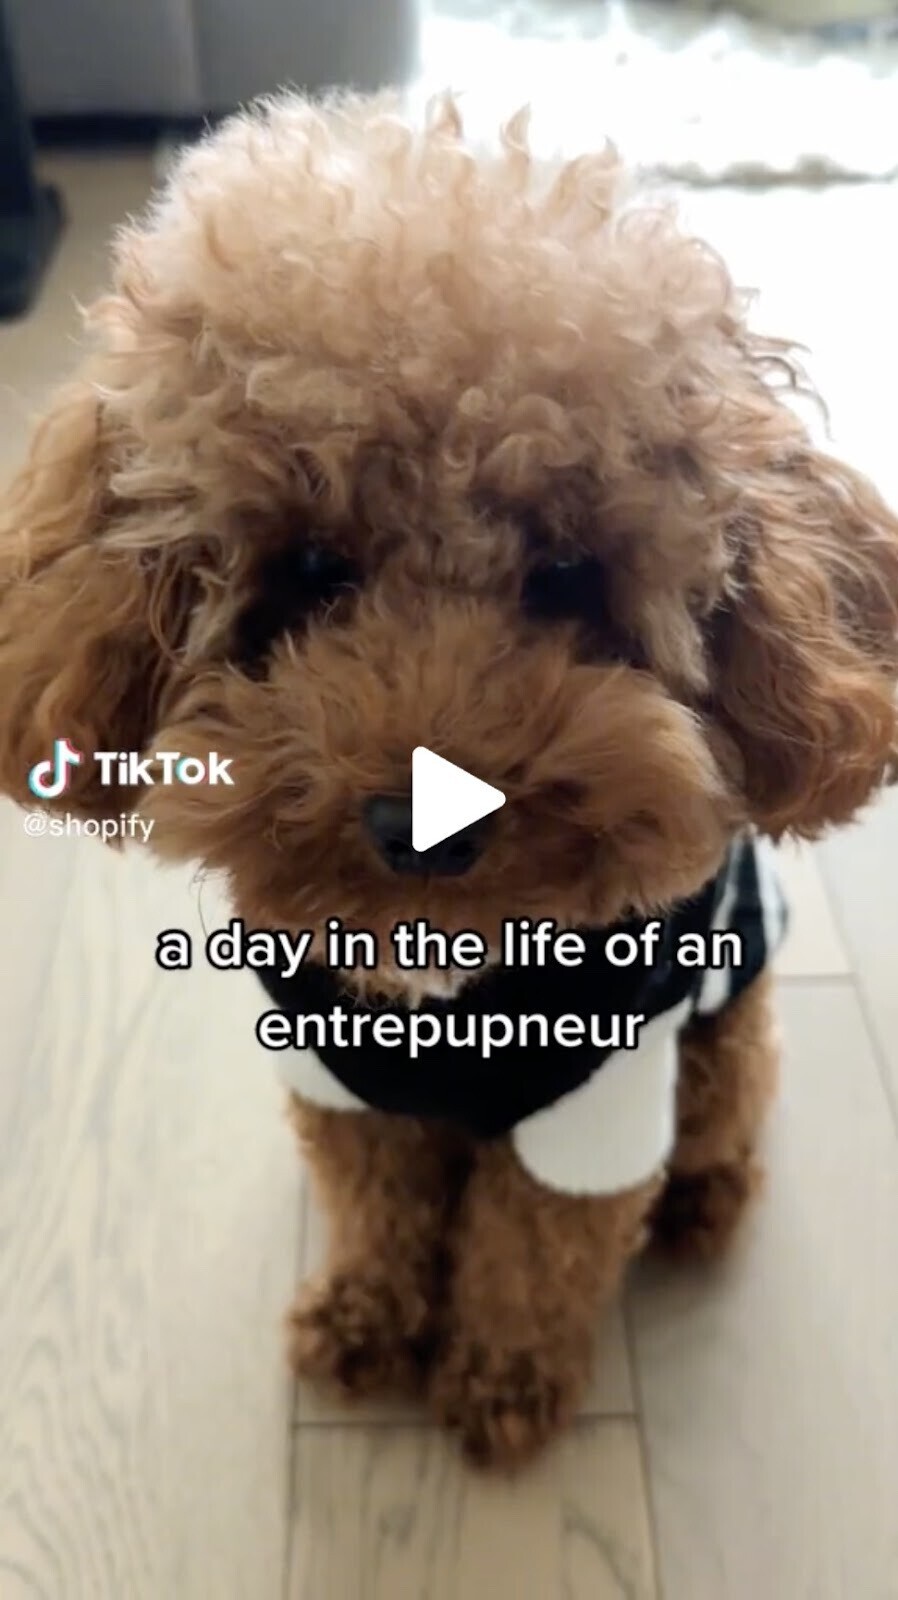 “a day in the life of an entrepupneur" TikTok video by Shopify